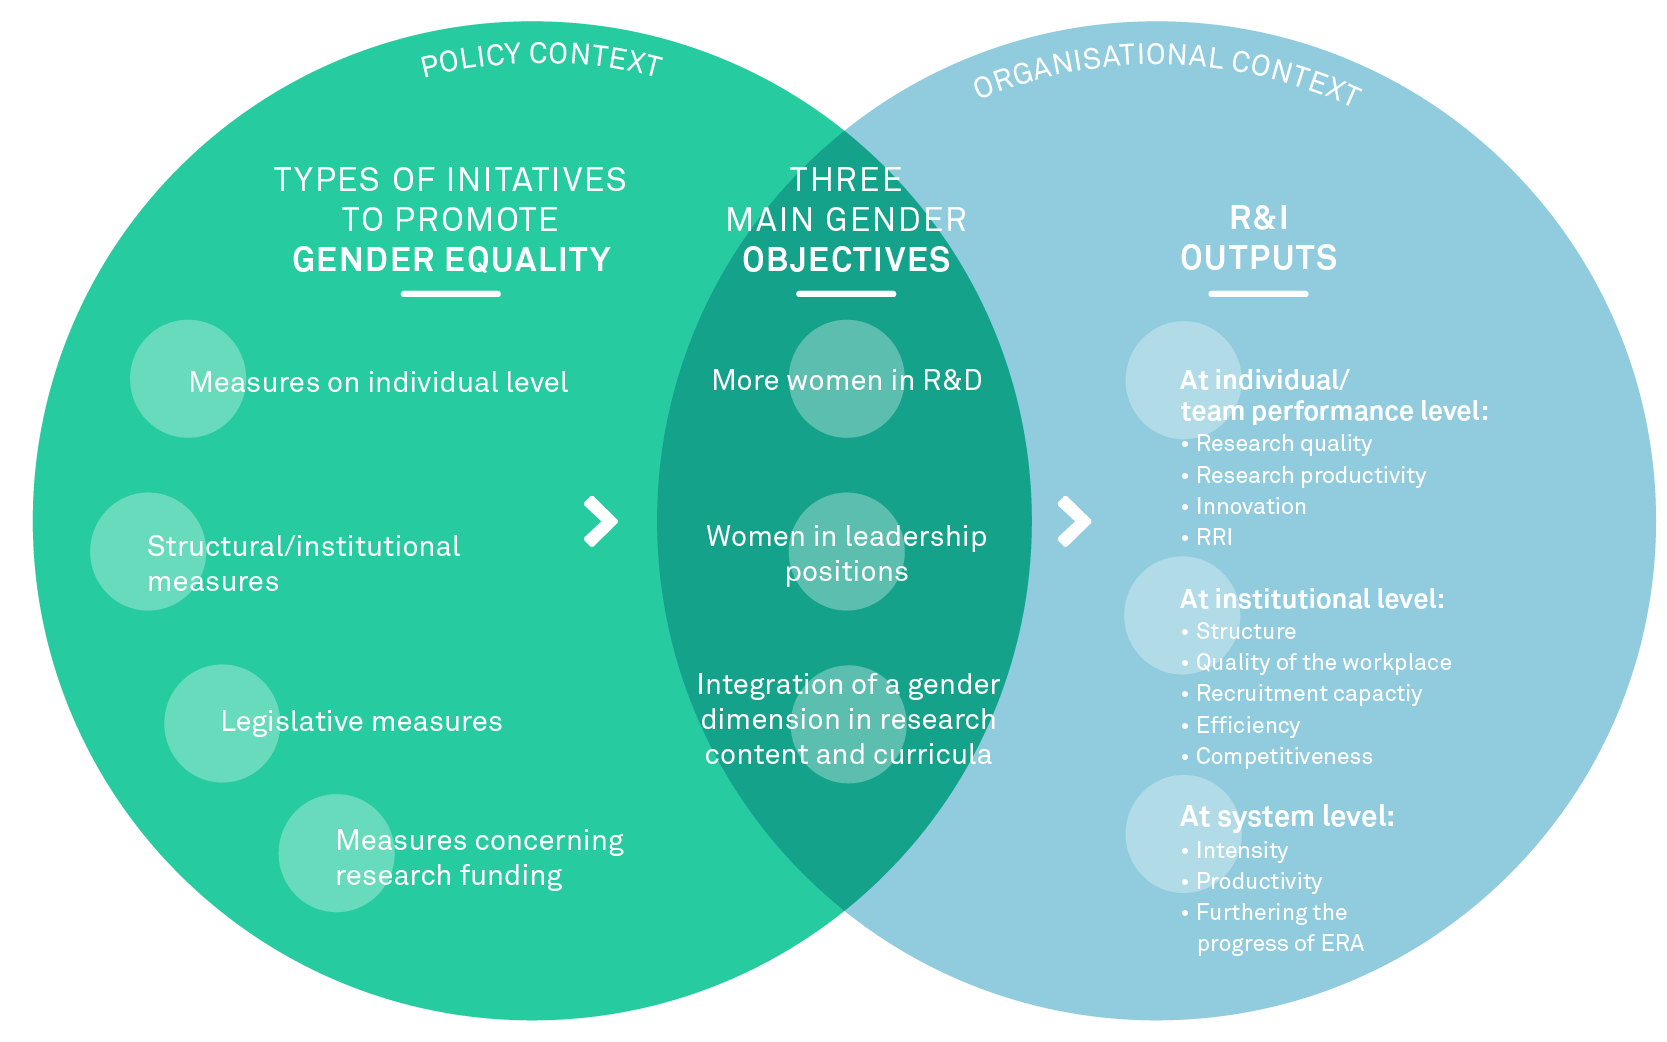 Main elements of the conceptual model to evaluate the impacts of gender equality measures on RTDI